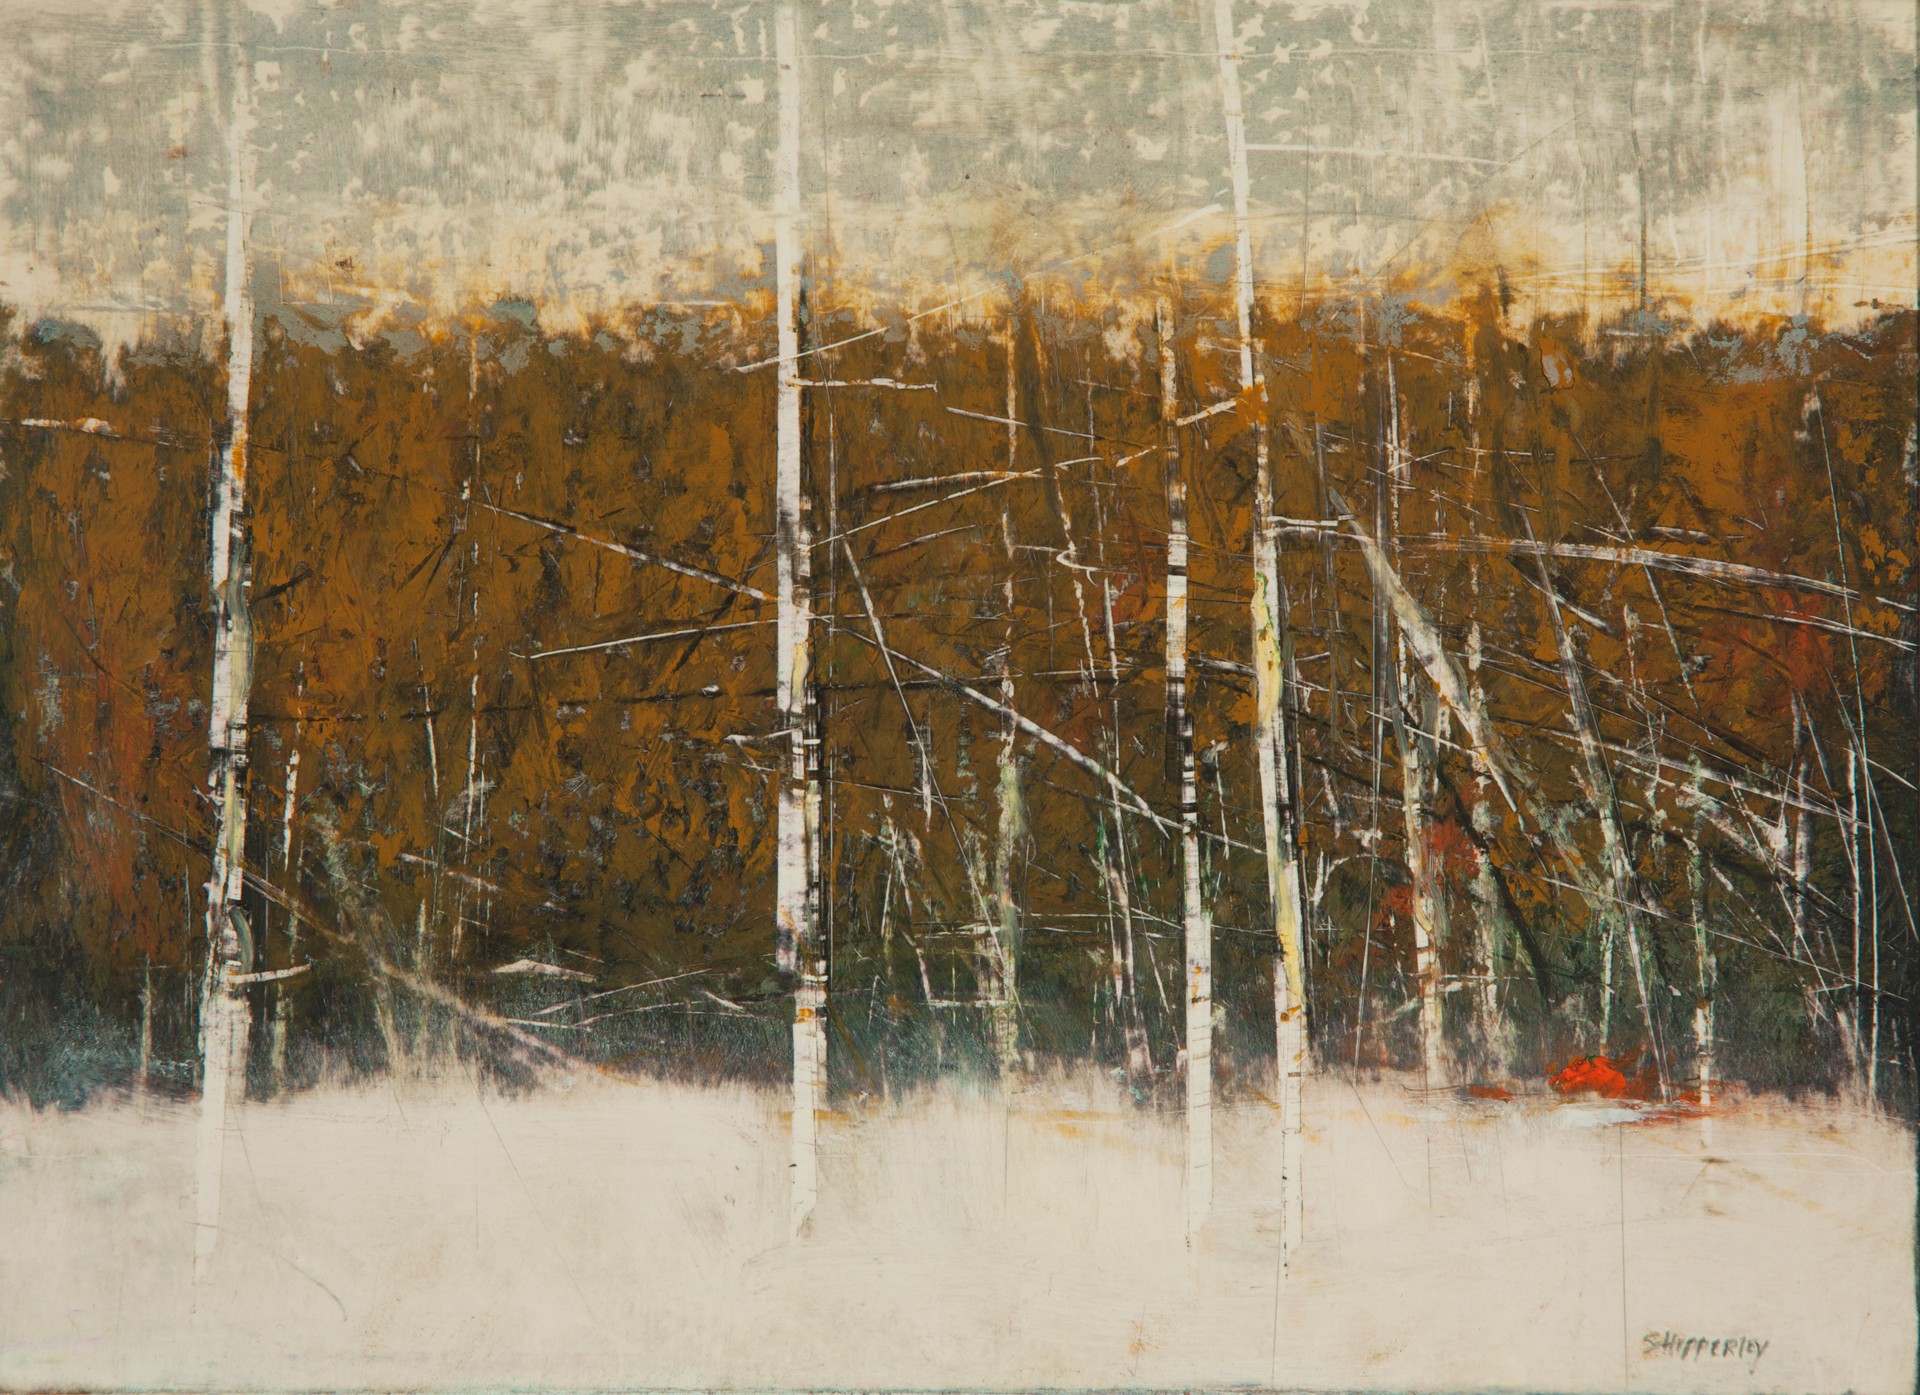 Winter Birches by George Shipperley